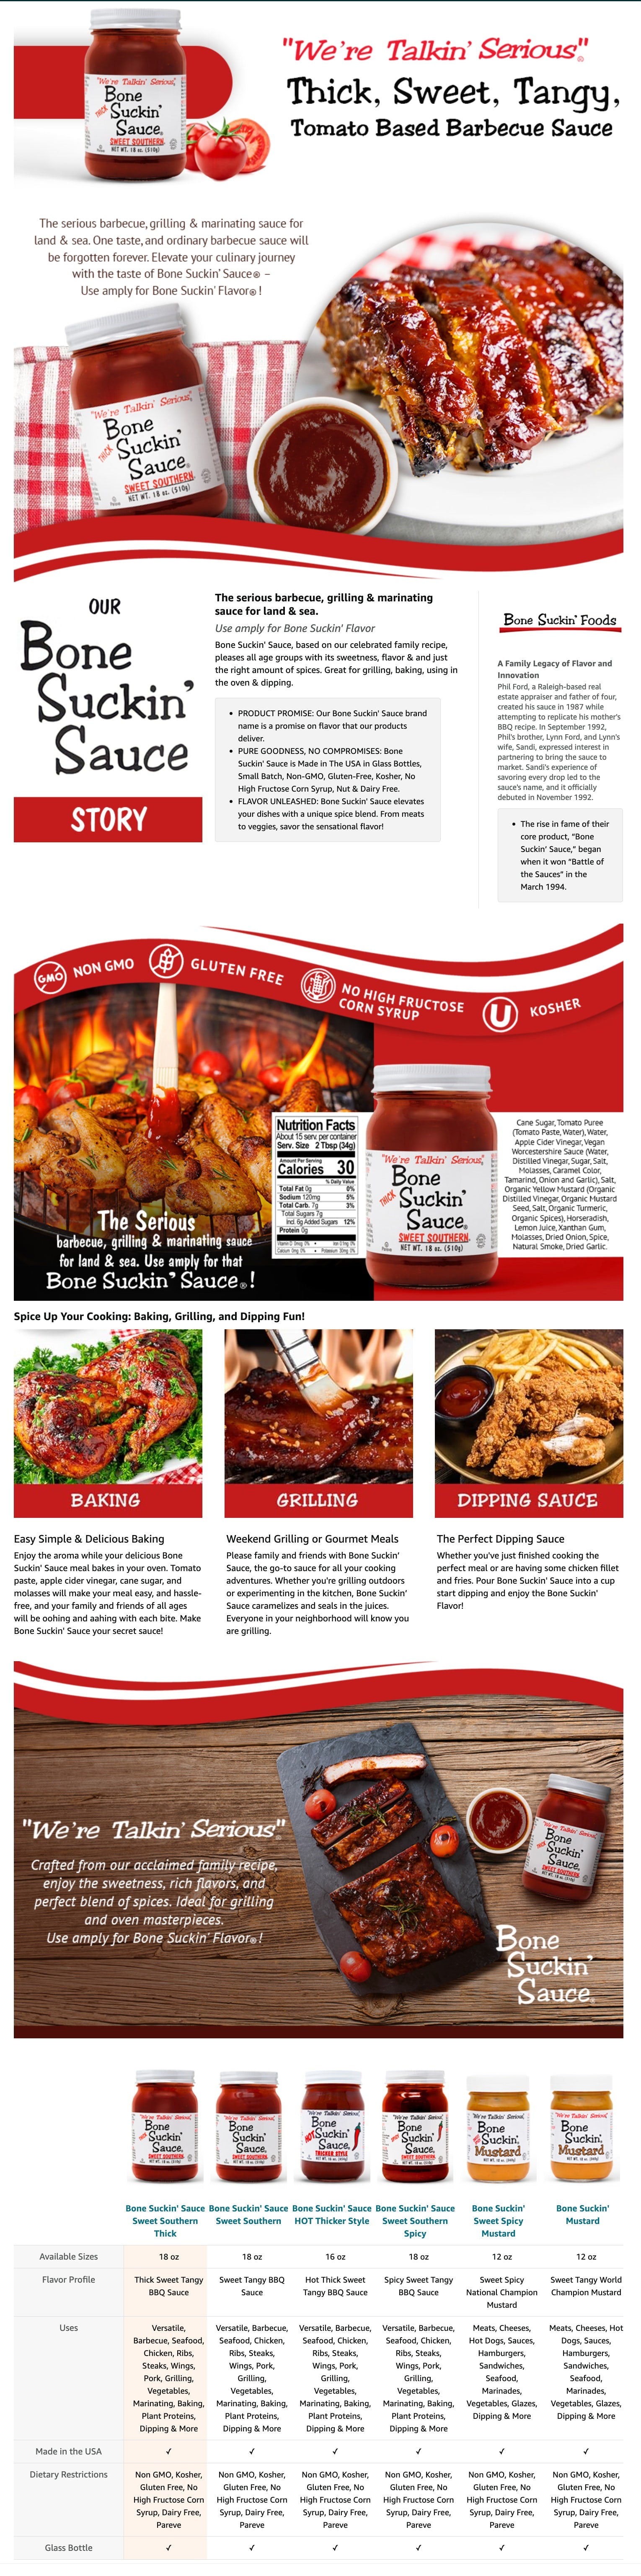 Bone Suckin' Sauce®, Sweet Southern® Thick, 18 oz. Love the flavor of Bone Suckin’ Sauce®, but want something that will really stick to your ribs? We are pleased to offer our Sweet Southern® Thick in a 18 oz. jar. Gluten free Bone Suckin' Sauces are the ONLY barbecue sauces rated #1 by Newsweek, Food & Wine and many others. Rated "5 out of 5" by BBQ Sauce Reviews